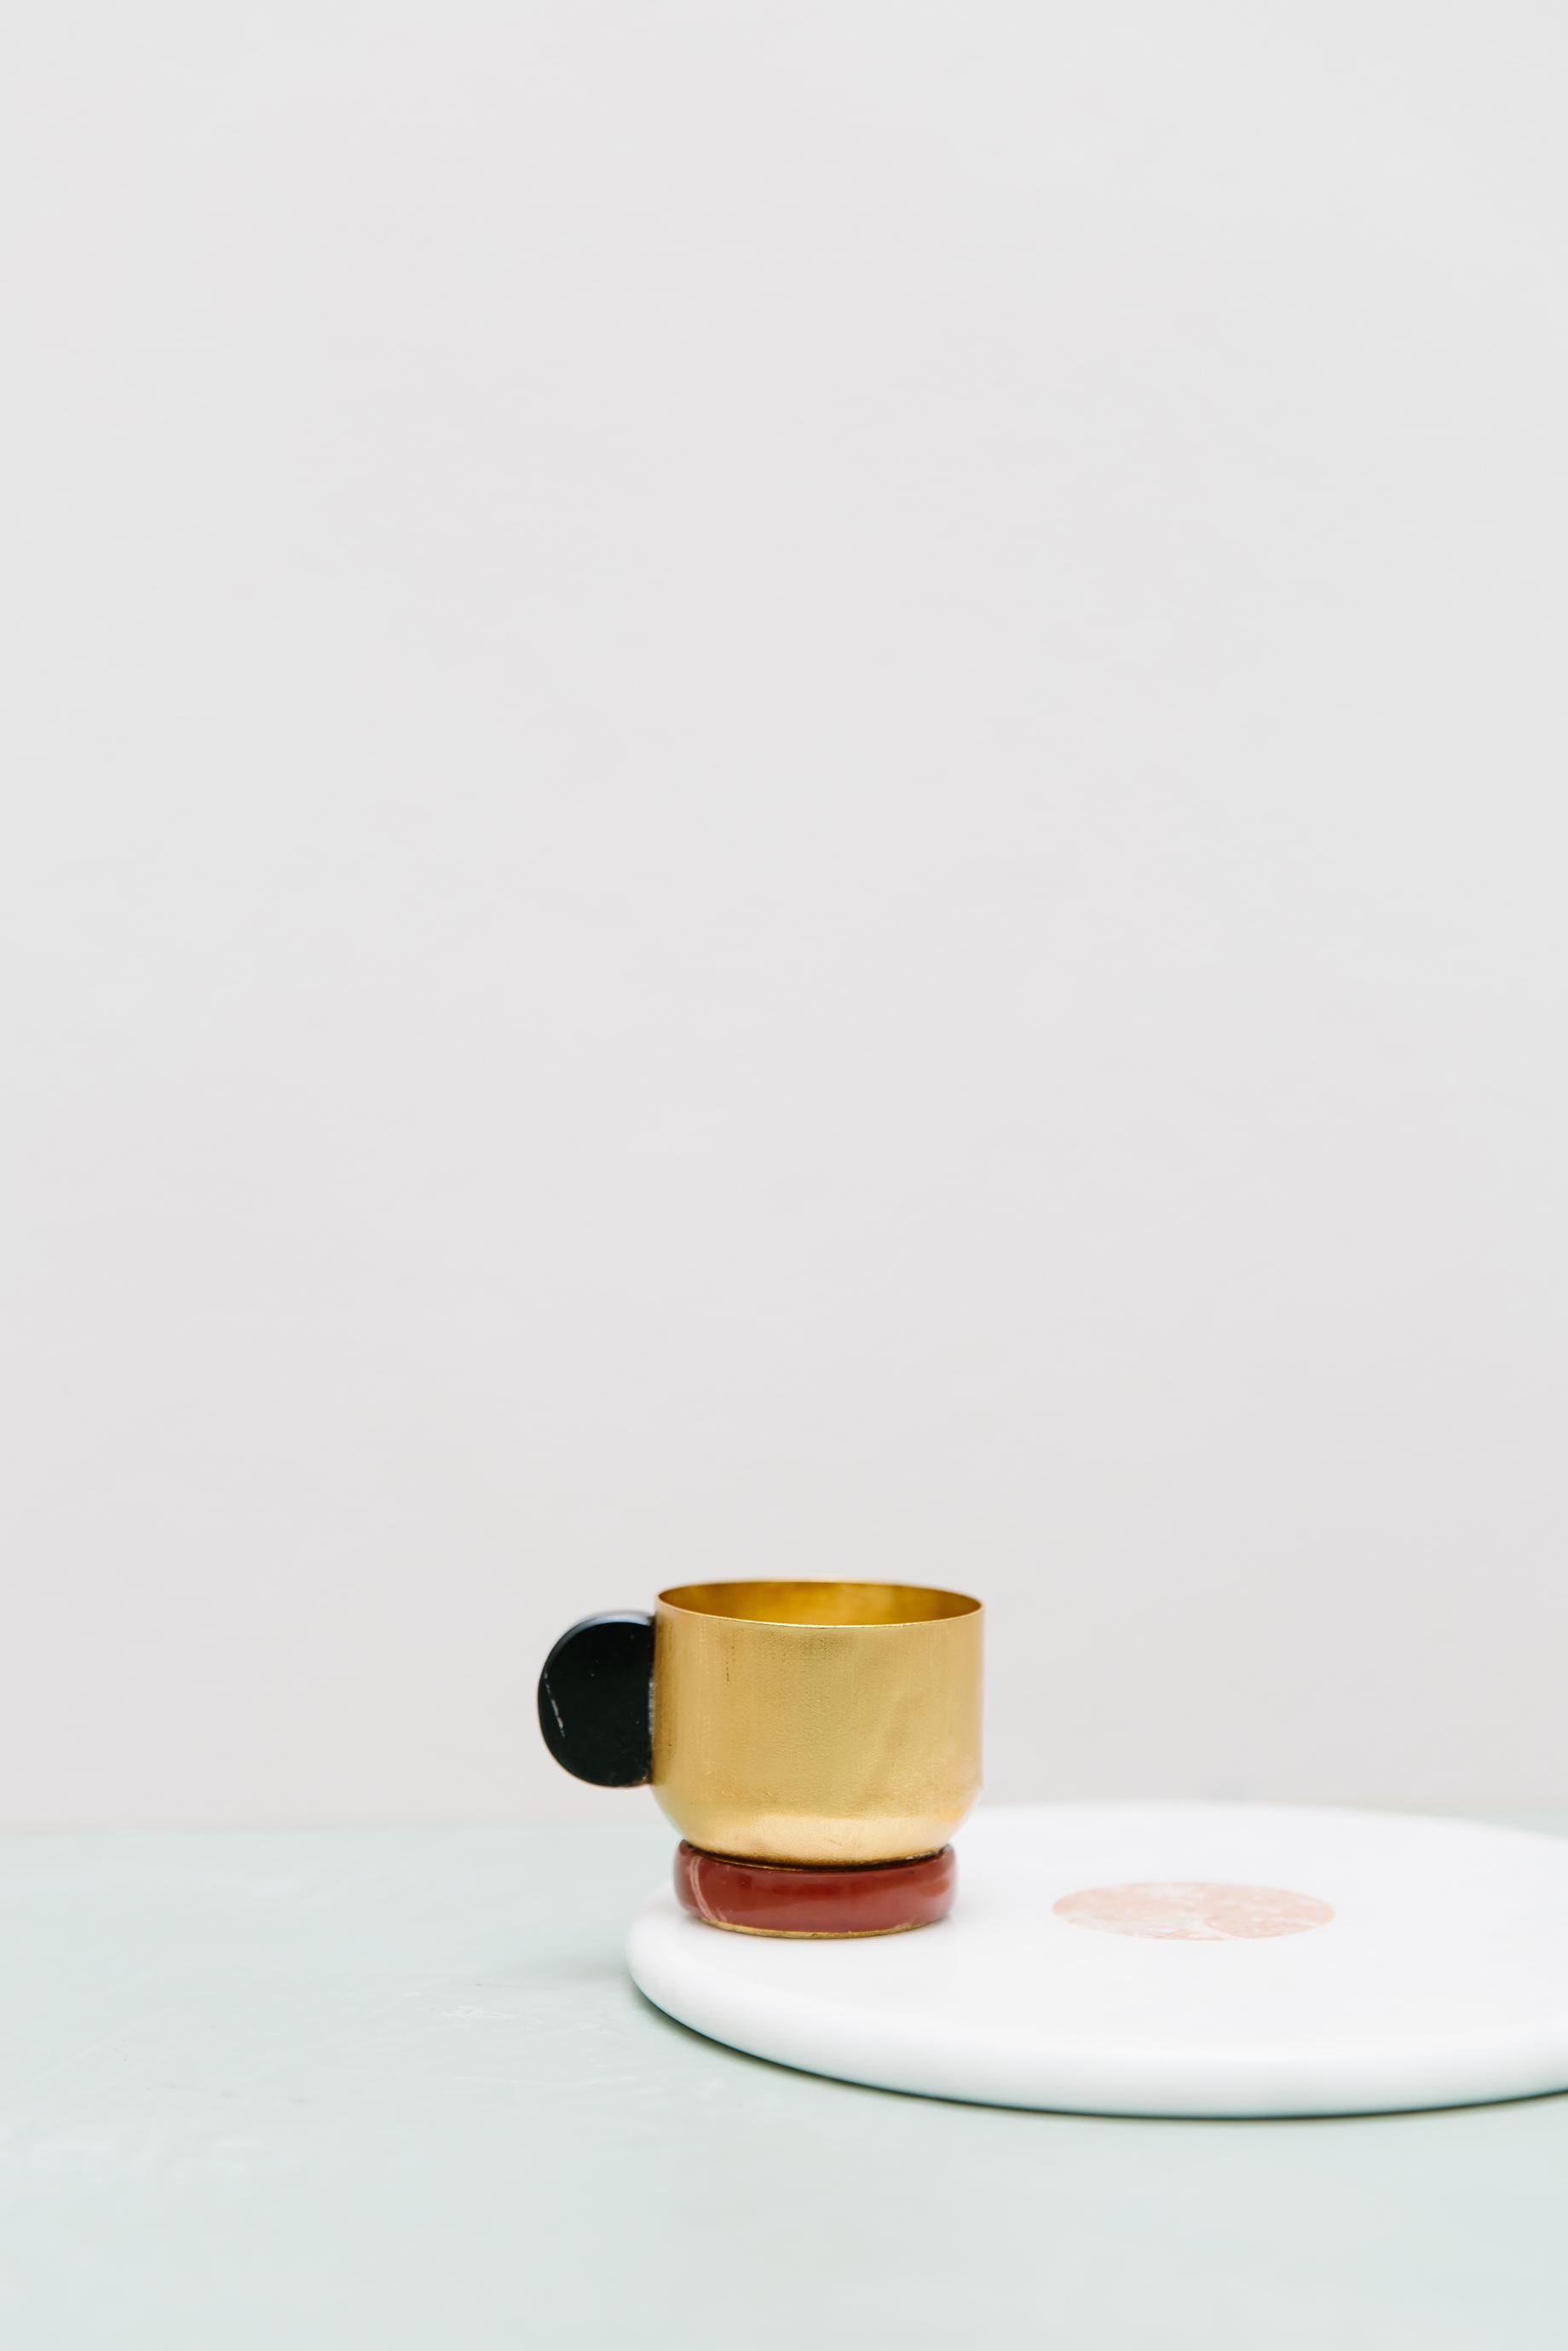 Modern Contemporary Gold Plated Tea Cup Onyx Stone Handle in Italy by Natalia Criado For Sale